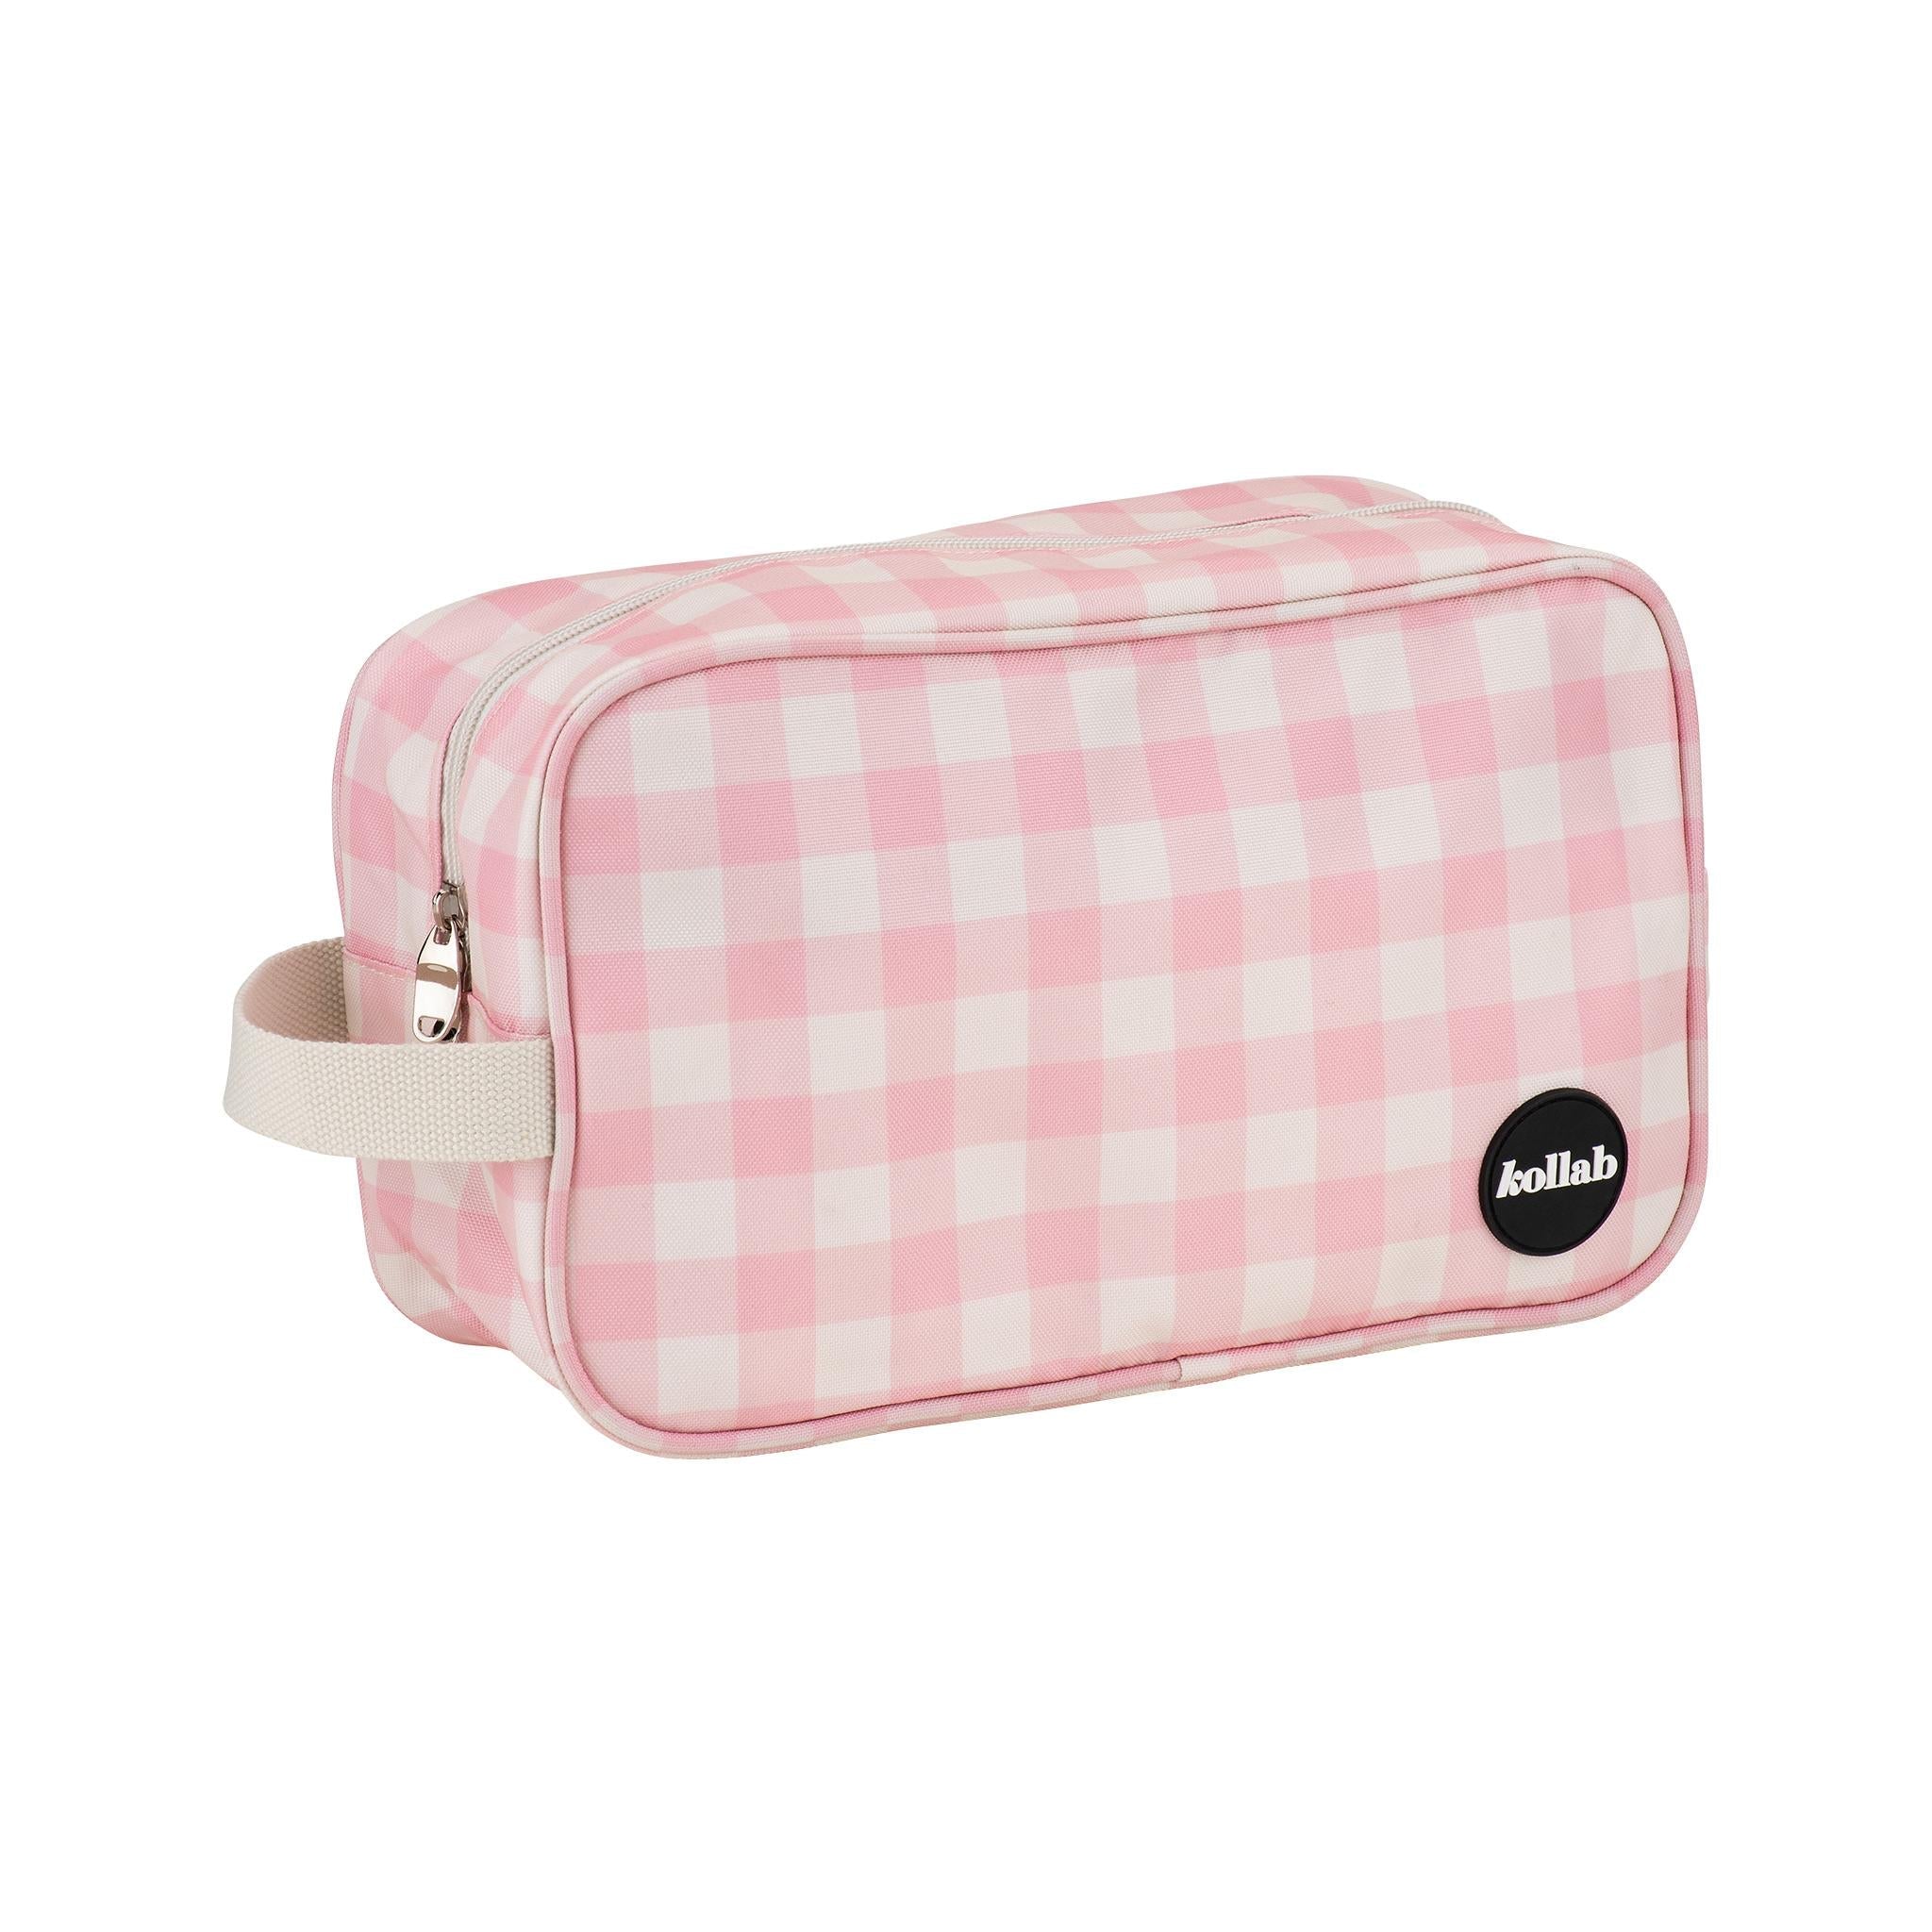 Holiday Travel Bag Candy Pink Check-Travel & Outdoors-Kollab-The Bay Room